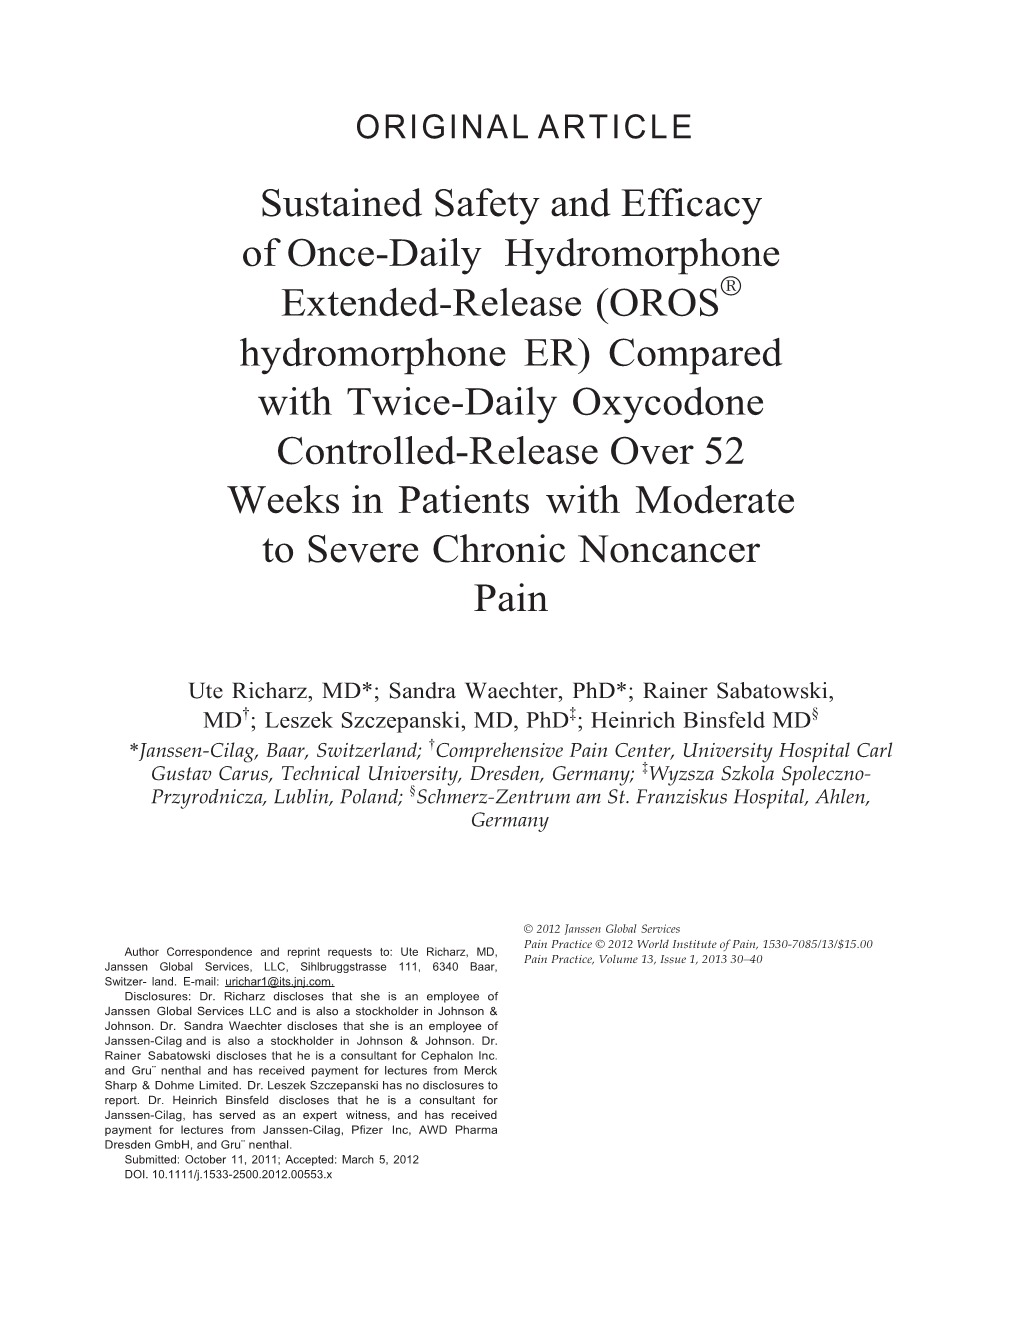 Sustained Safety and Efficacy of Onceâ Daily Hydromorphone Extendedâ Release (OROSÂ